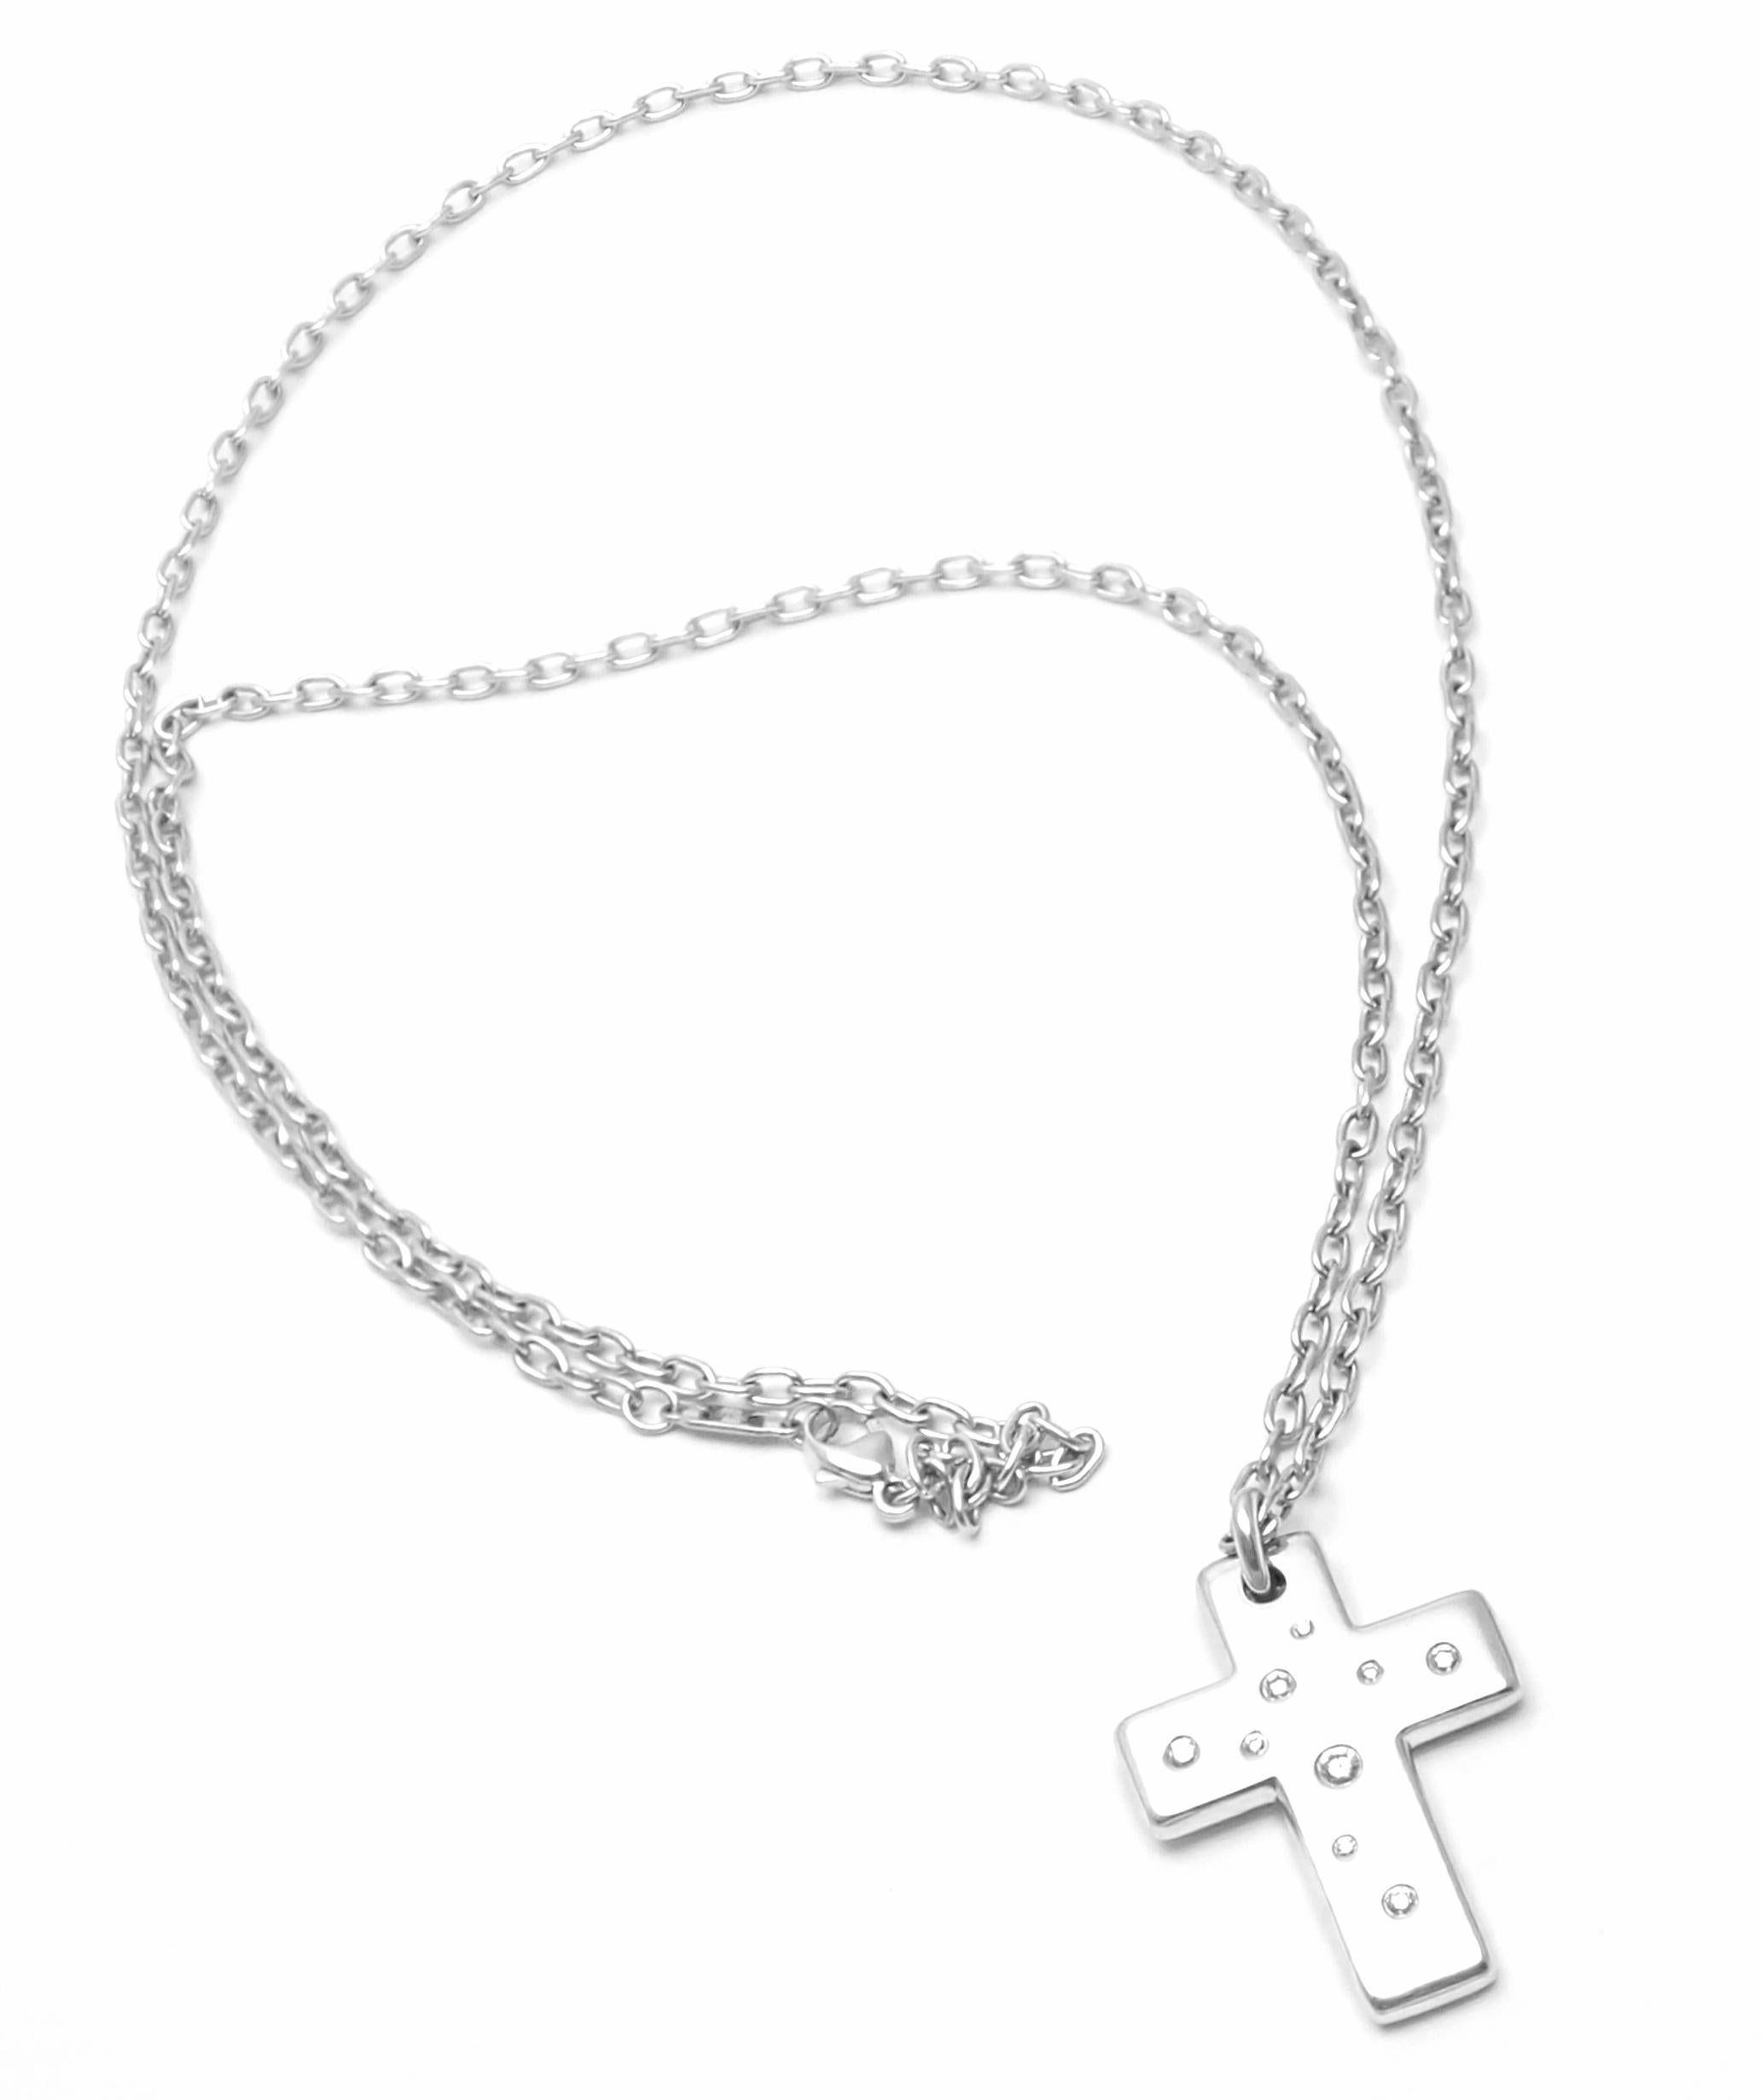 18k White Gold Diamond Etoile Cross Pendant Necklace by Tiffany & Co.
With 9 Round brilliant cut diamonds VS1 clarity, G color total weight approx. .20ct
Details:
Measurements: Length Chain 24